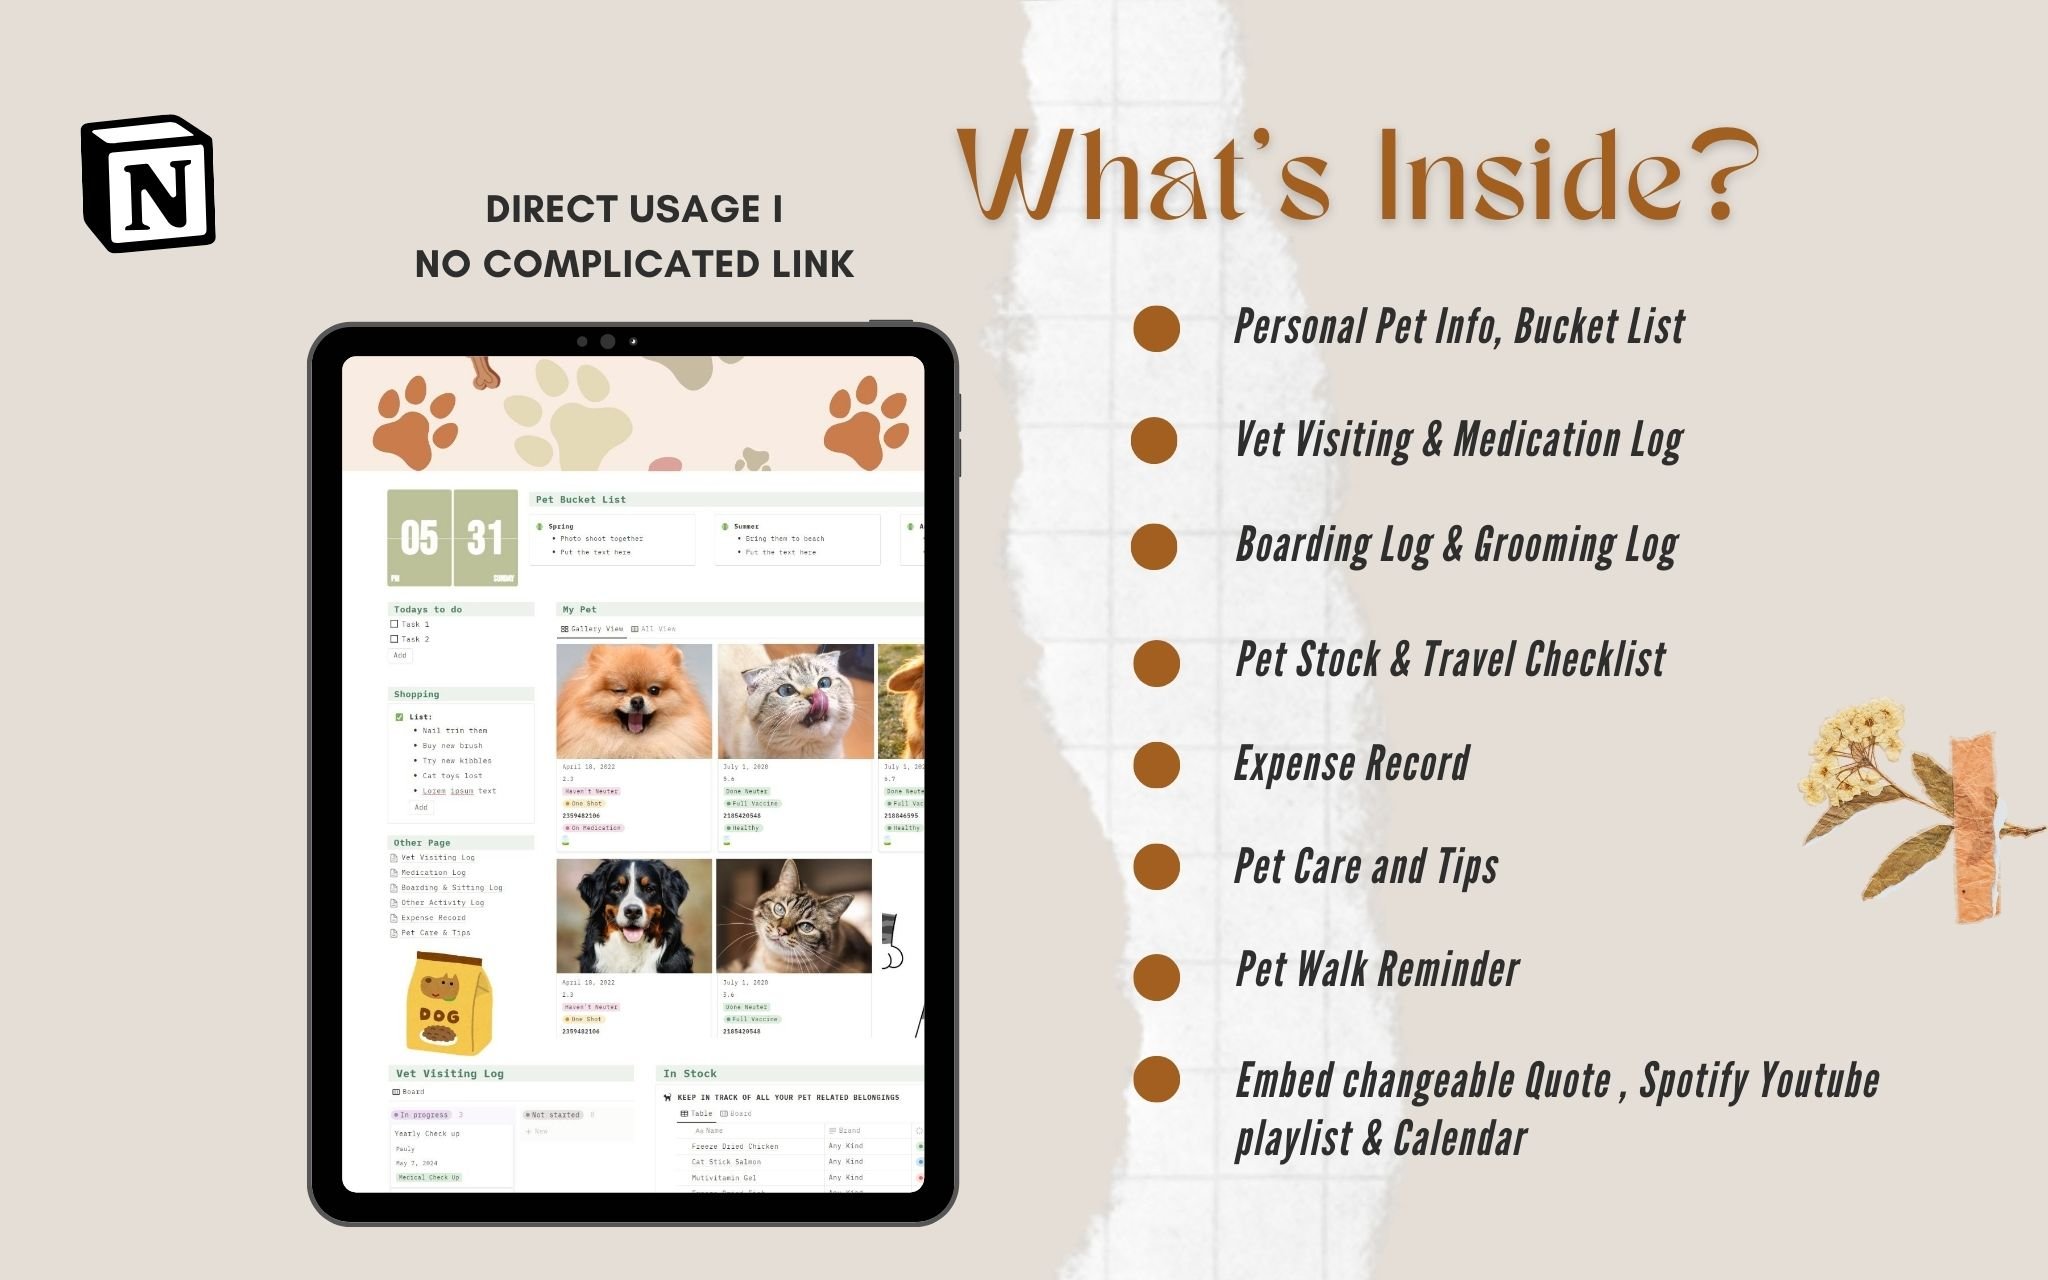 Your one-stop solution for organizing and managing every aspect of your pet's care for example tracking veterinary visits, medical records, dietary needs, physical activities, grooming schedules, and behavioral logs.